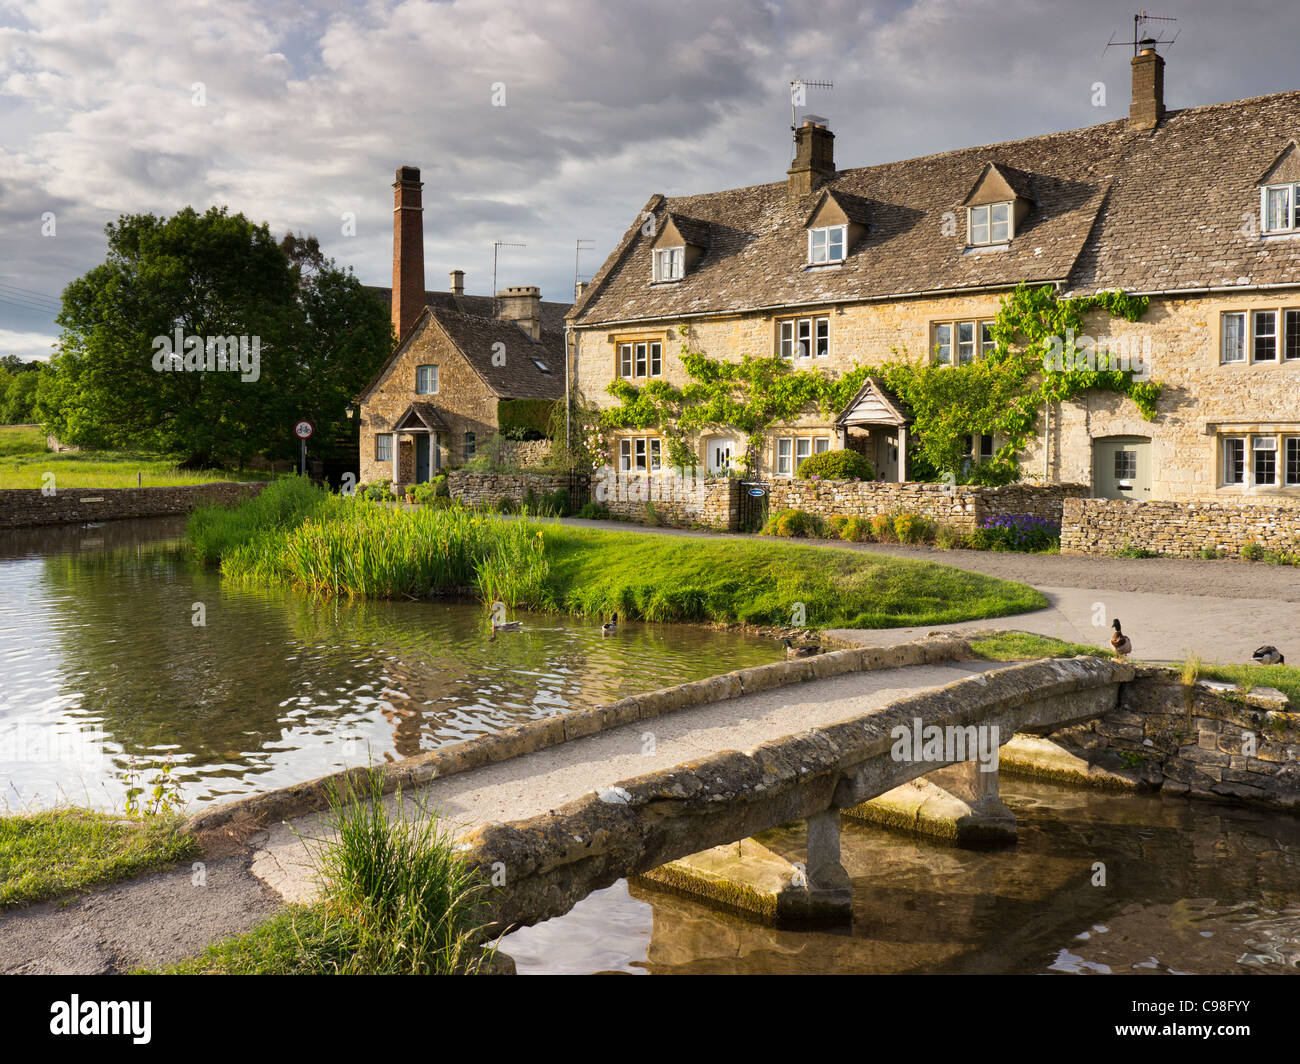 Cottages and stone bridge, Lower Slaughter, The Cotswolds, Gloucestershire, England Stock Photo